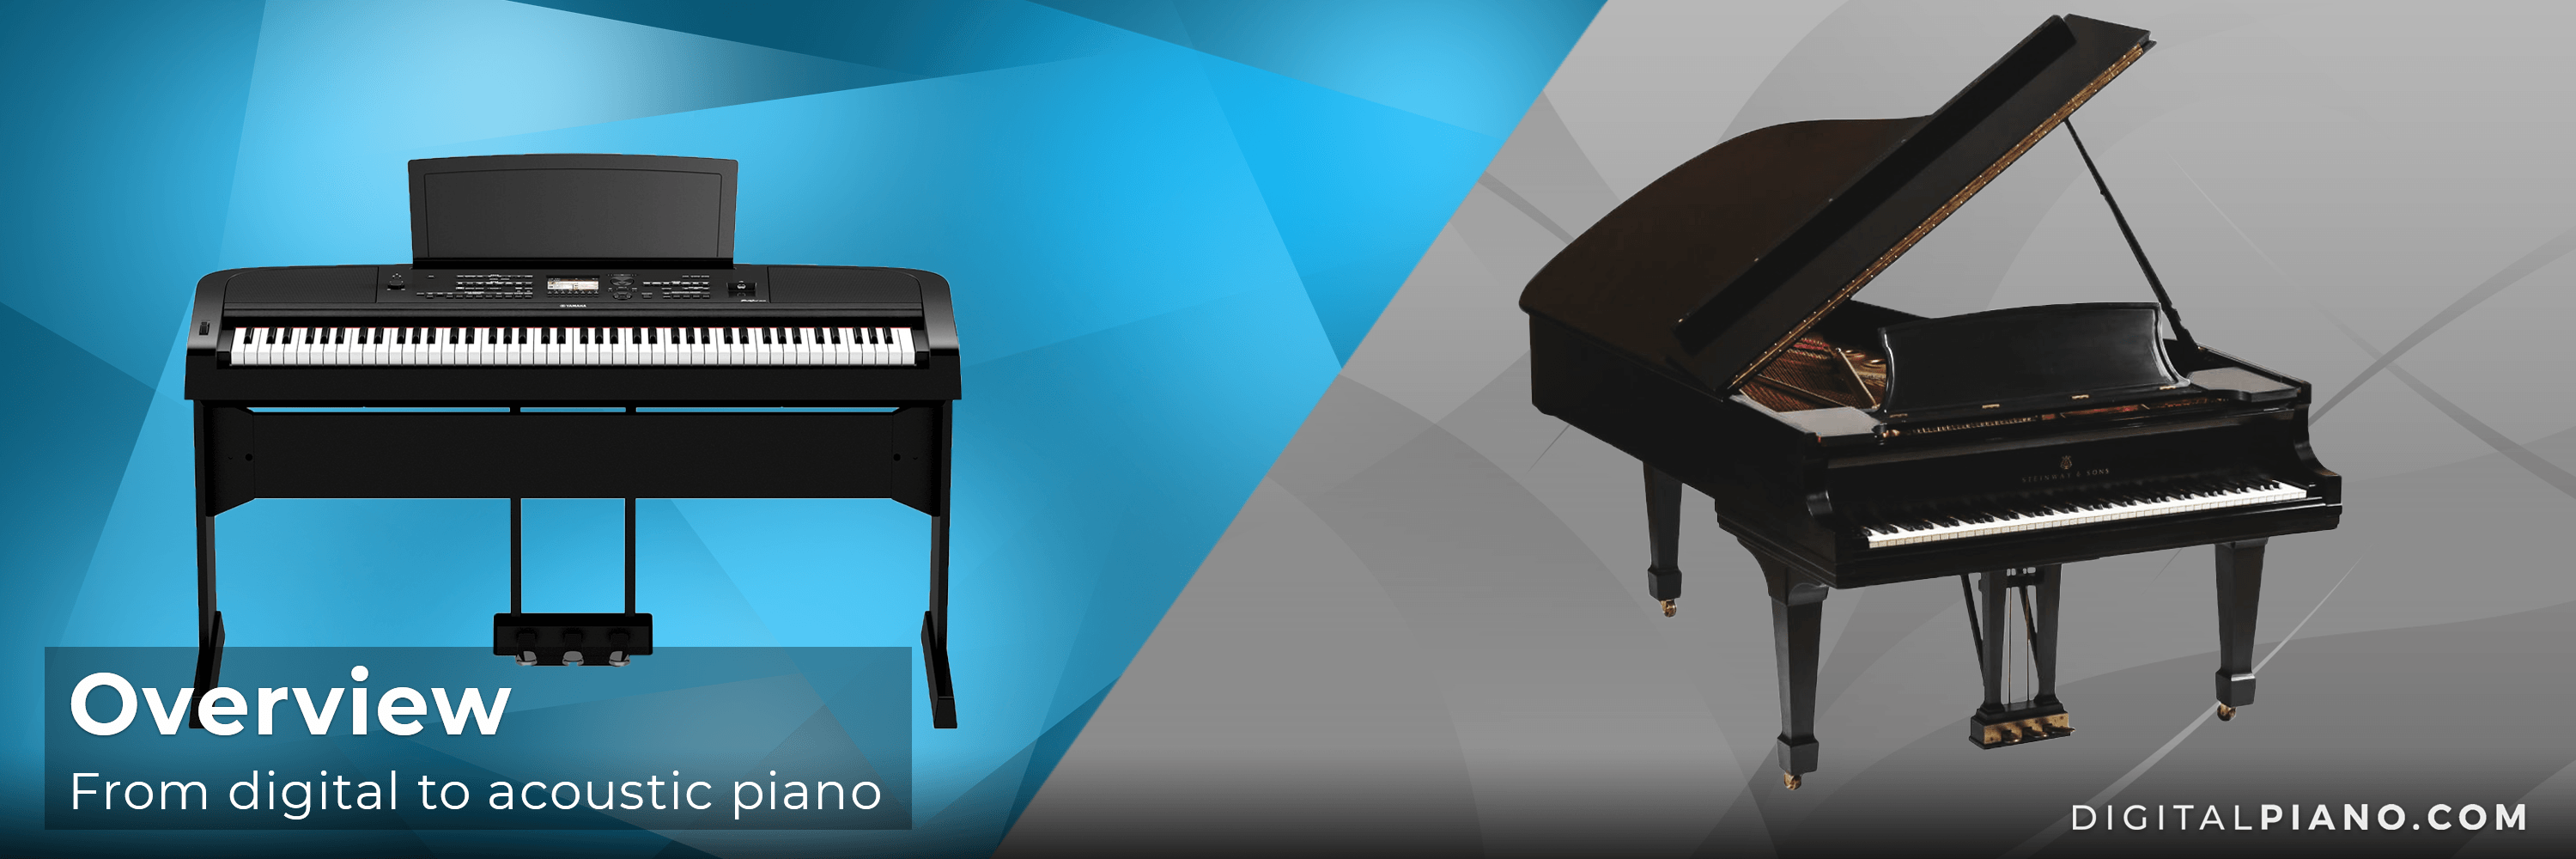 Overview - from digital to acoustic piano